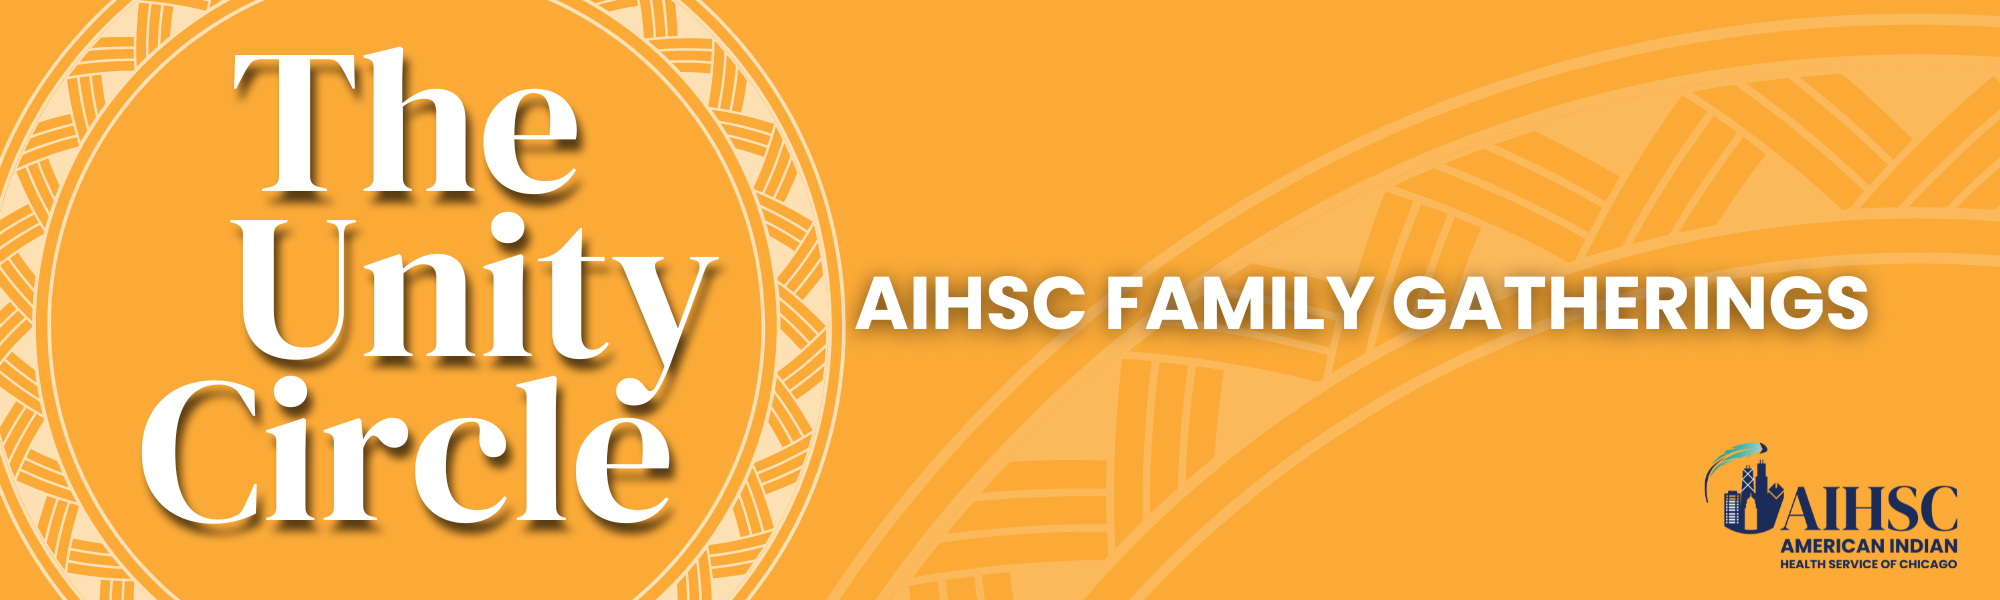 The Unity Circle Family Gatherings fro AIHSC